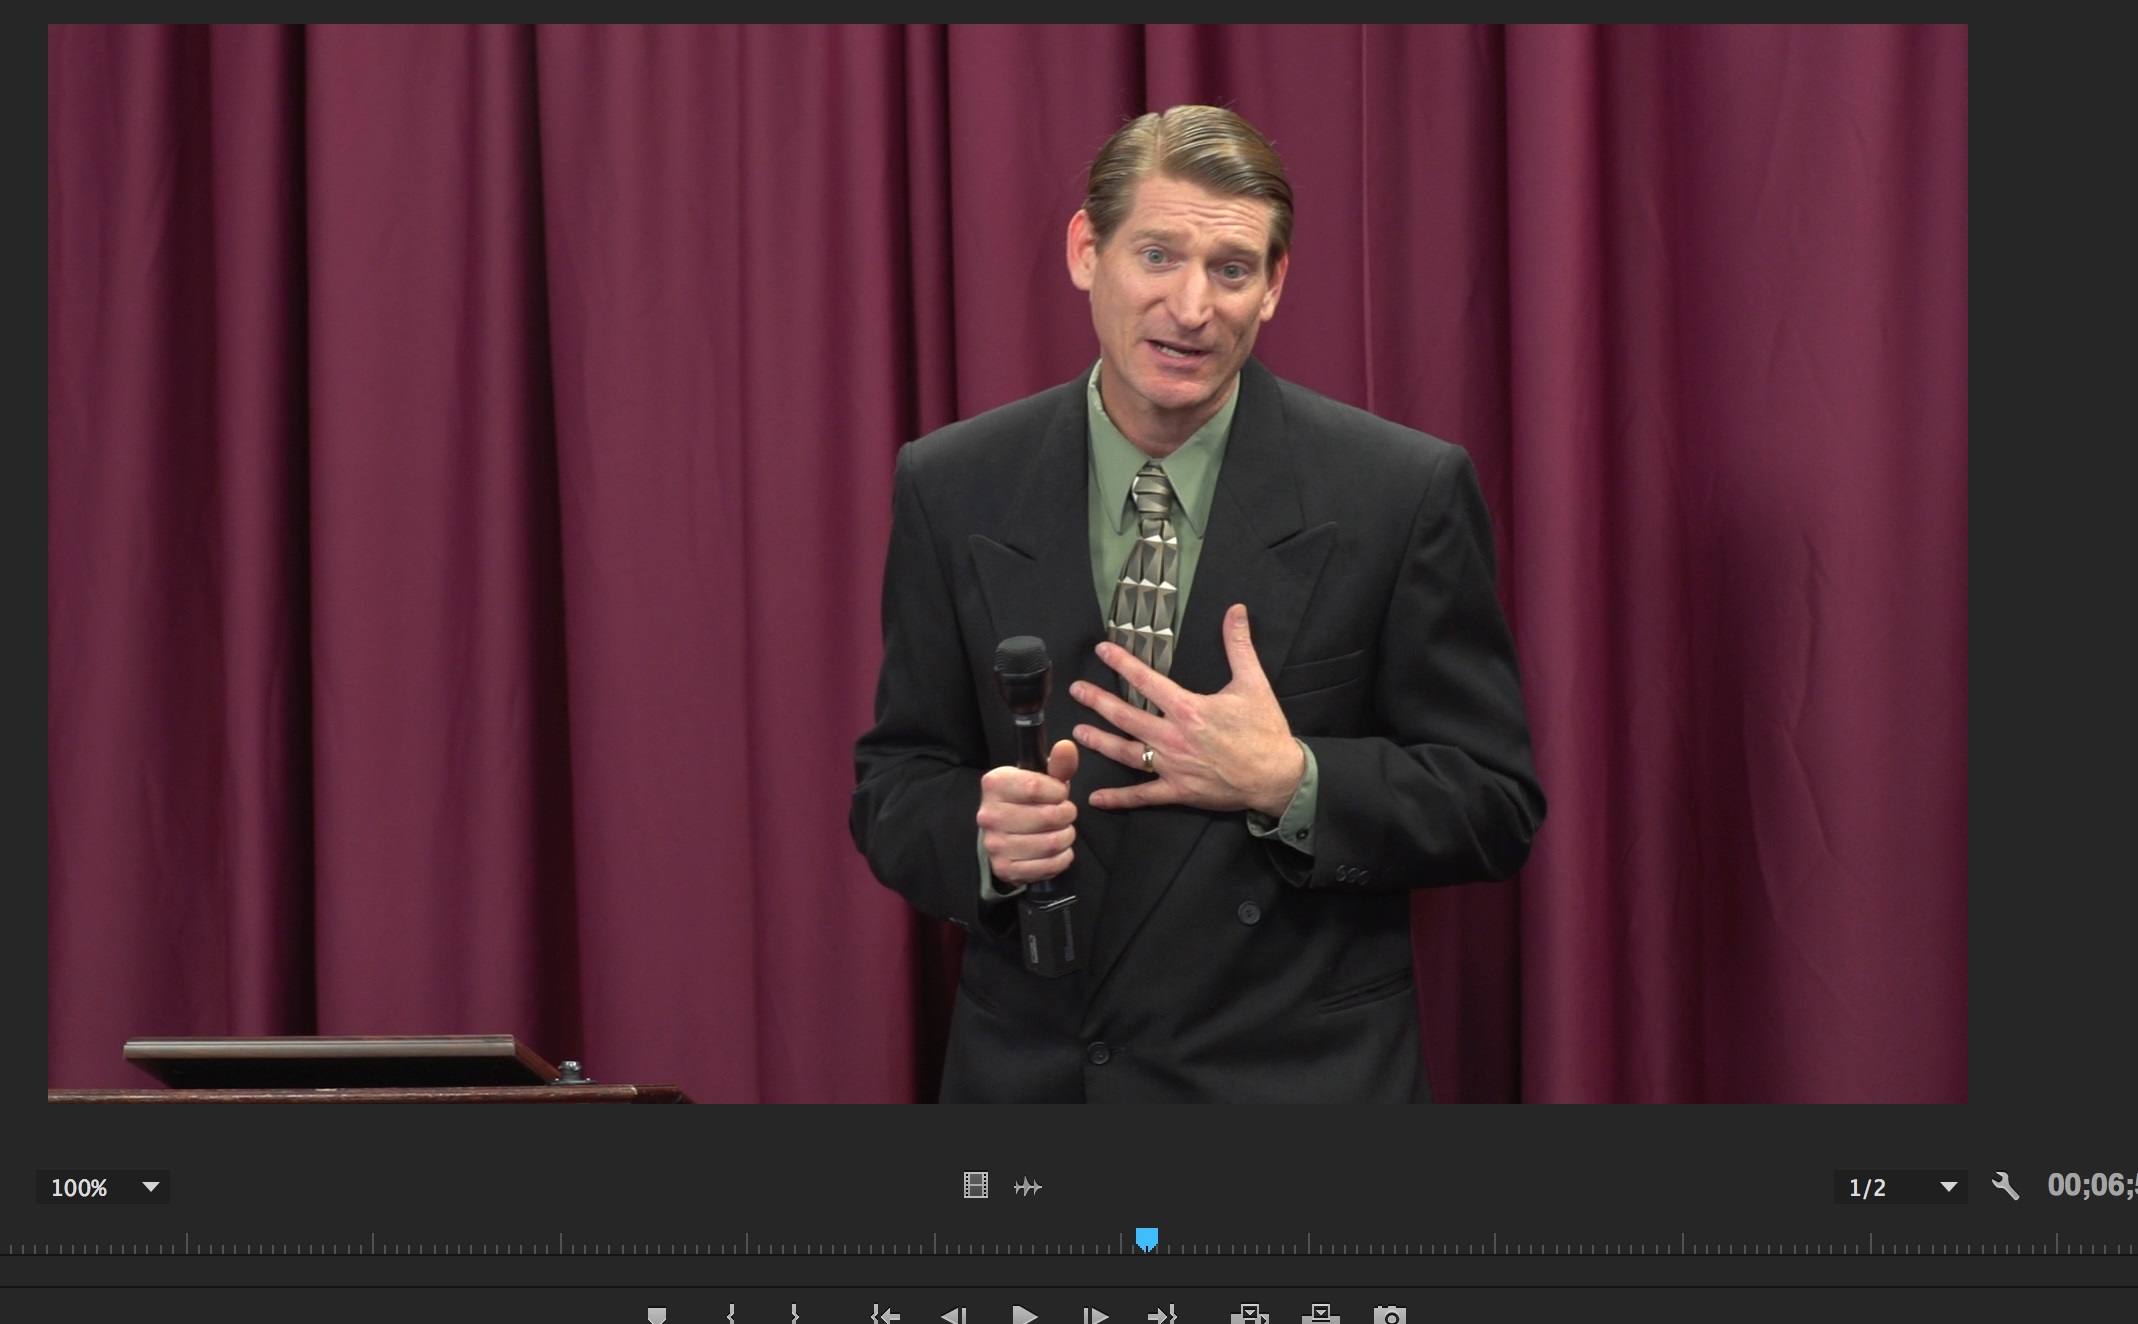 Screen Capture from Toastmasters International educational videos 2015